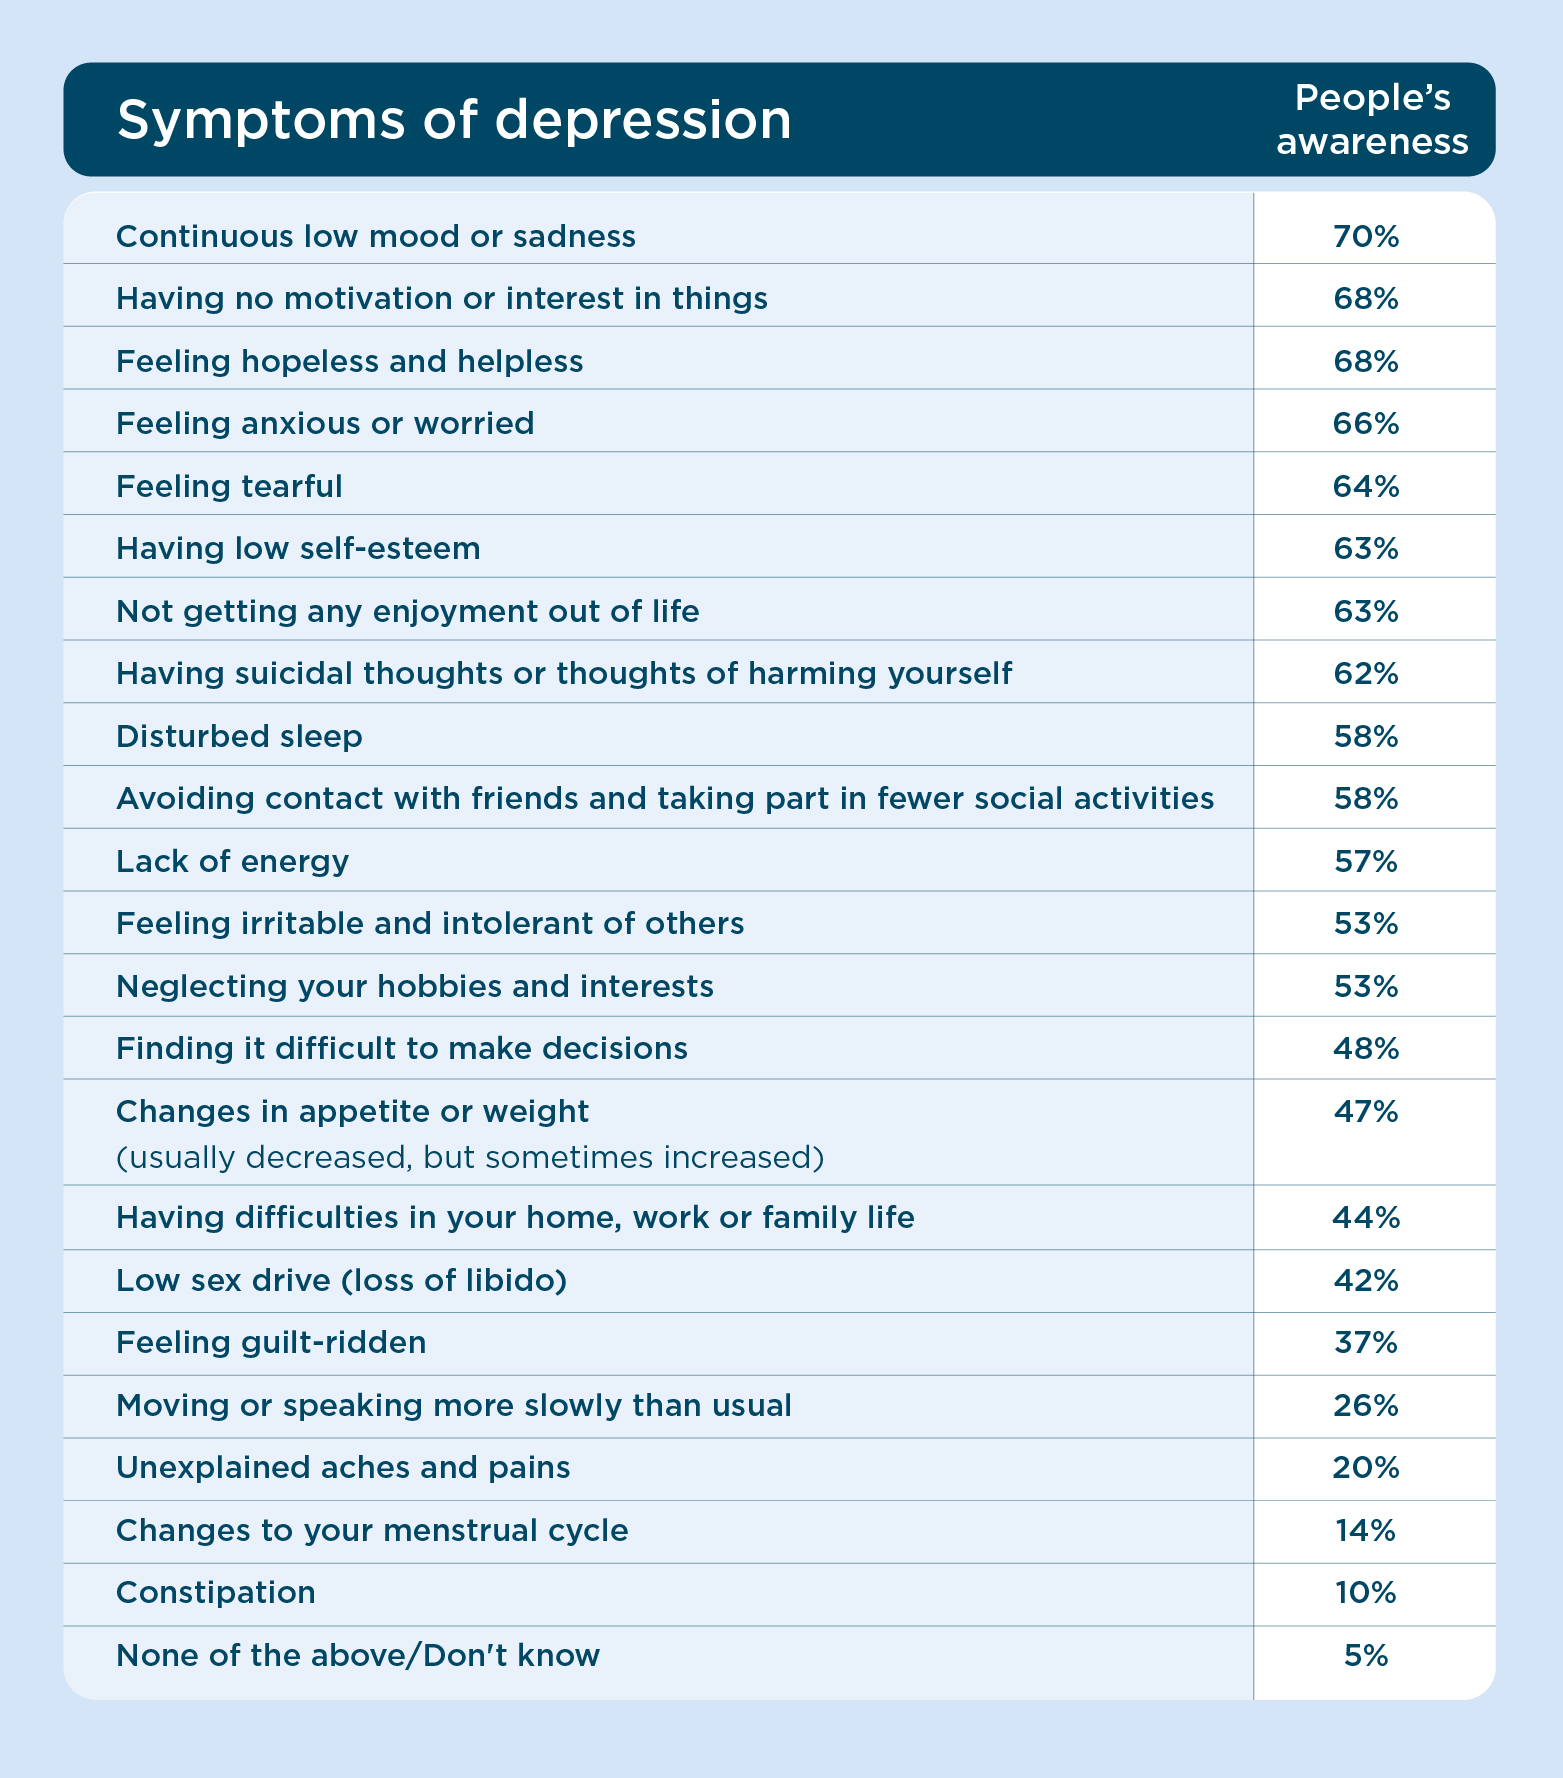 list of symptoms of depression by awareness